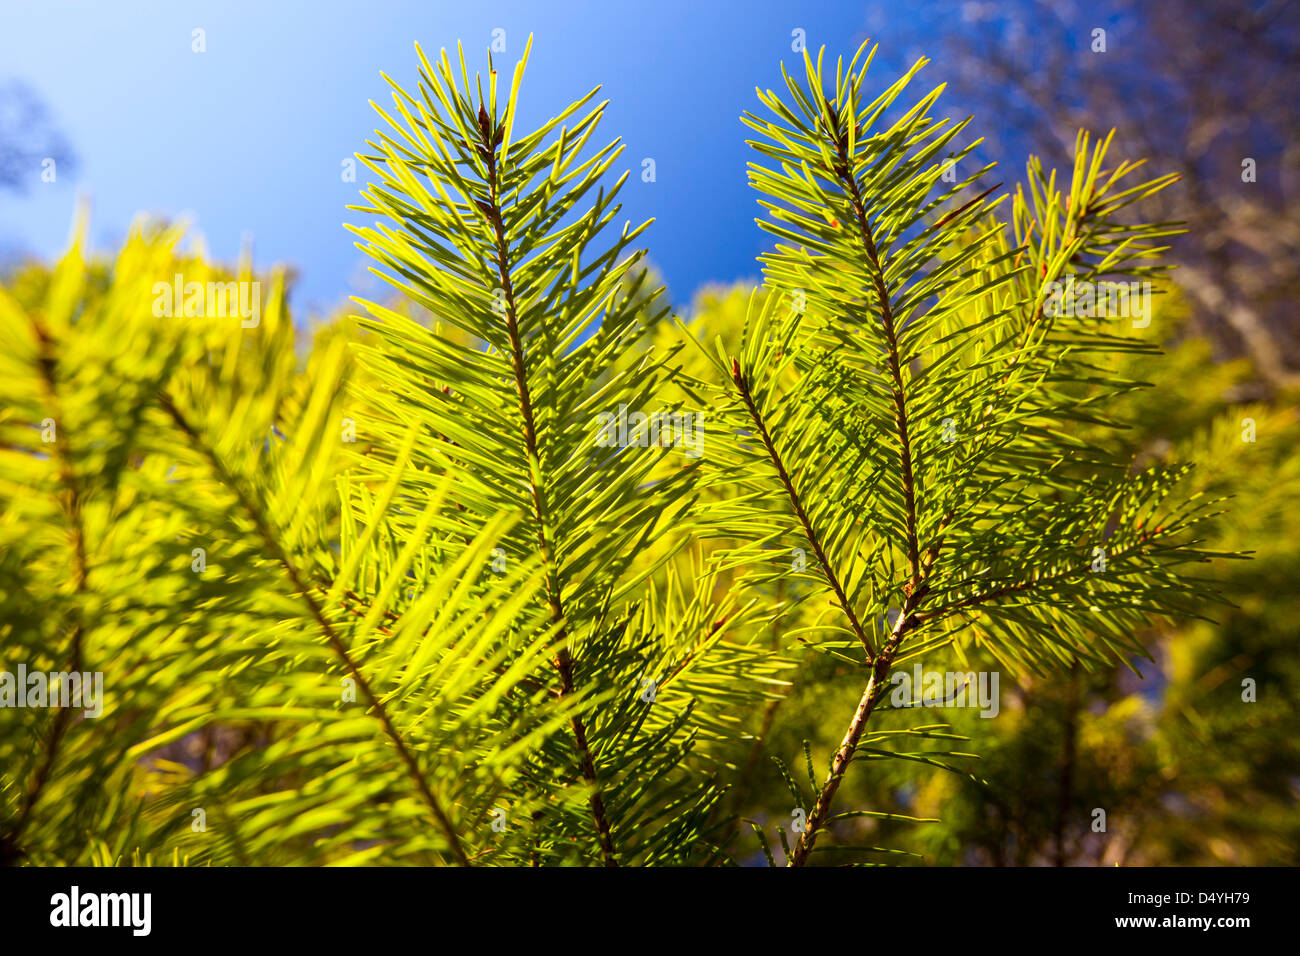 new growth on pine trees. Stock Photo